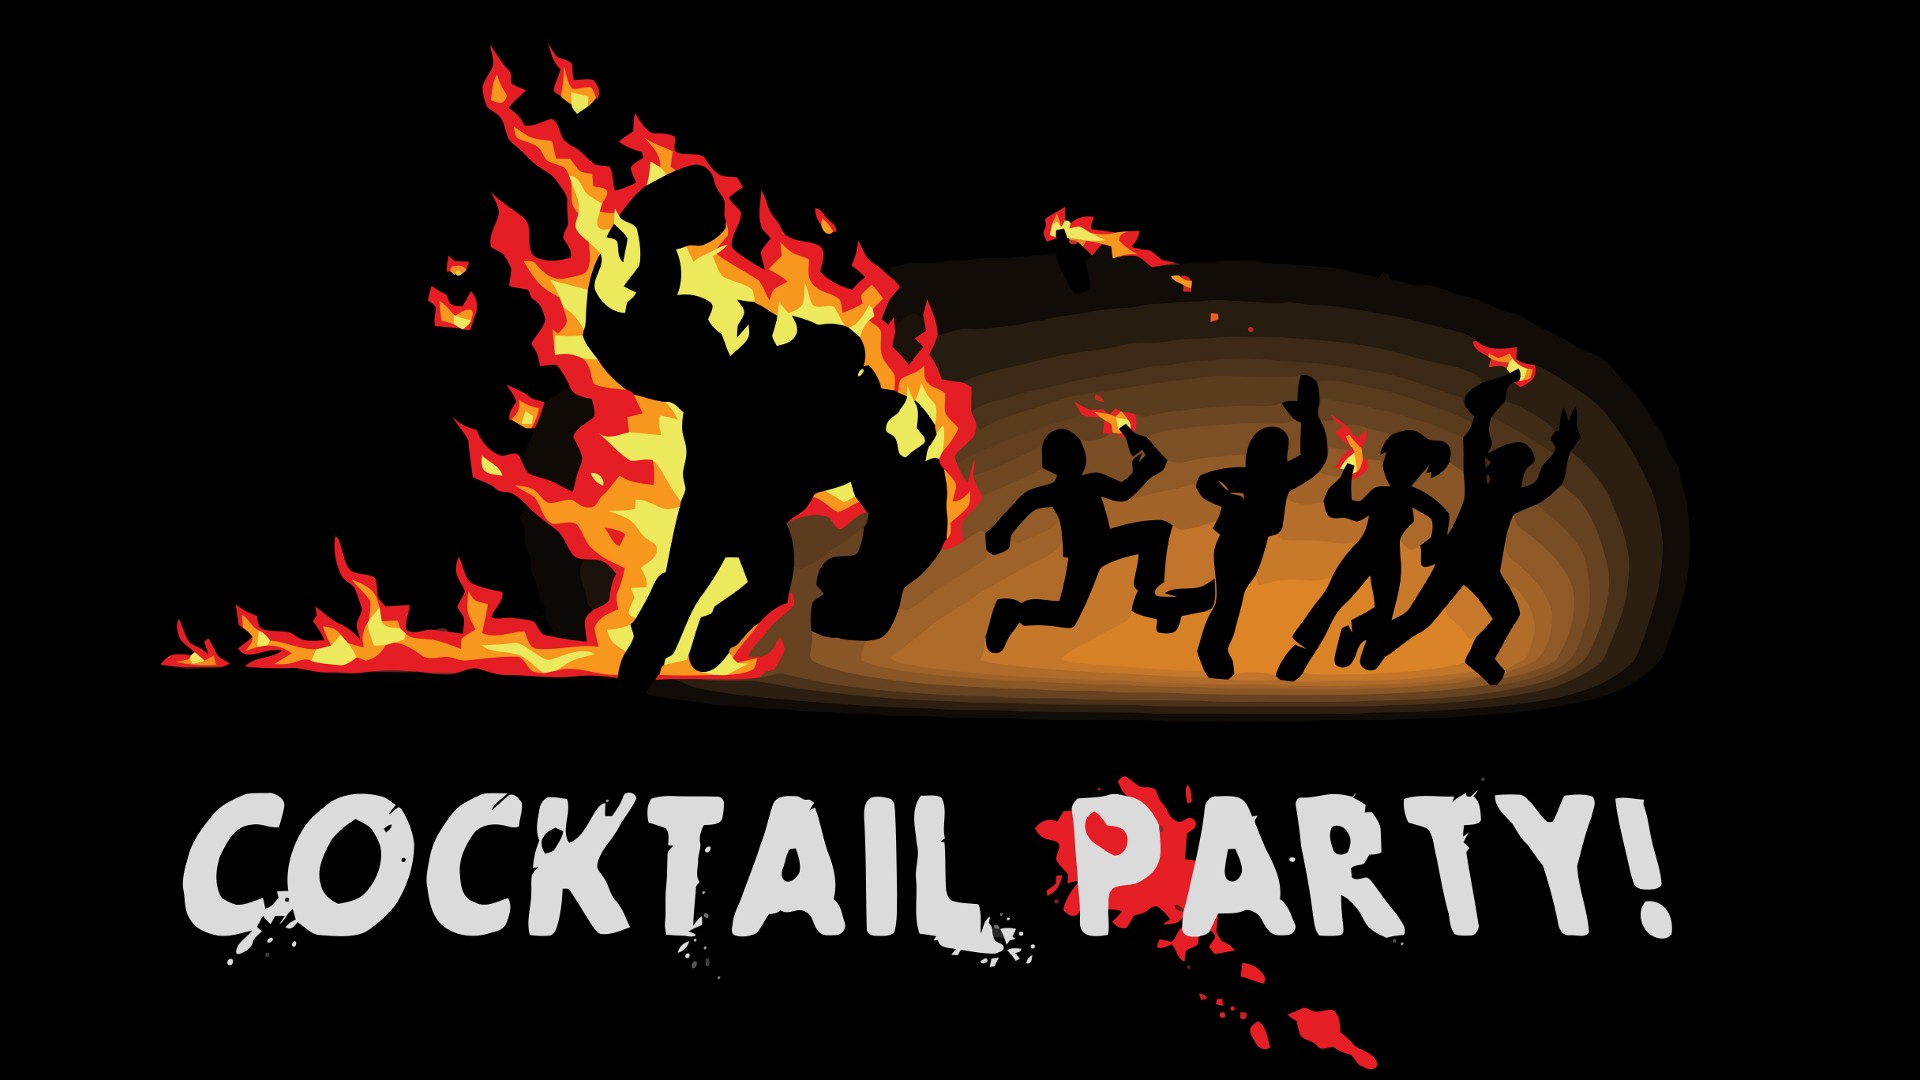 Download the Cocktail Party Wallpaper, Cocktail Party iPhone